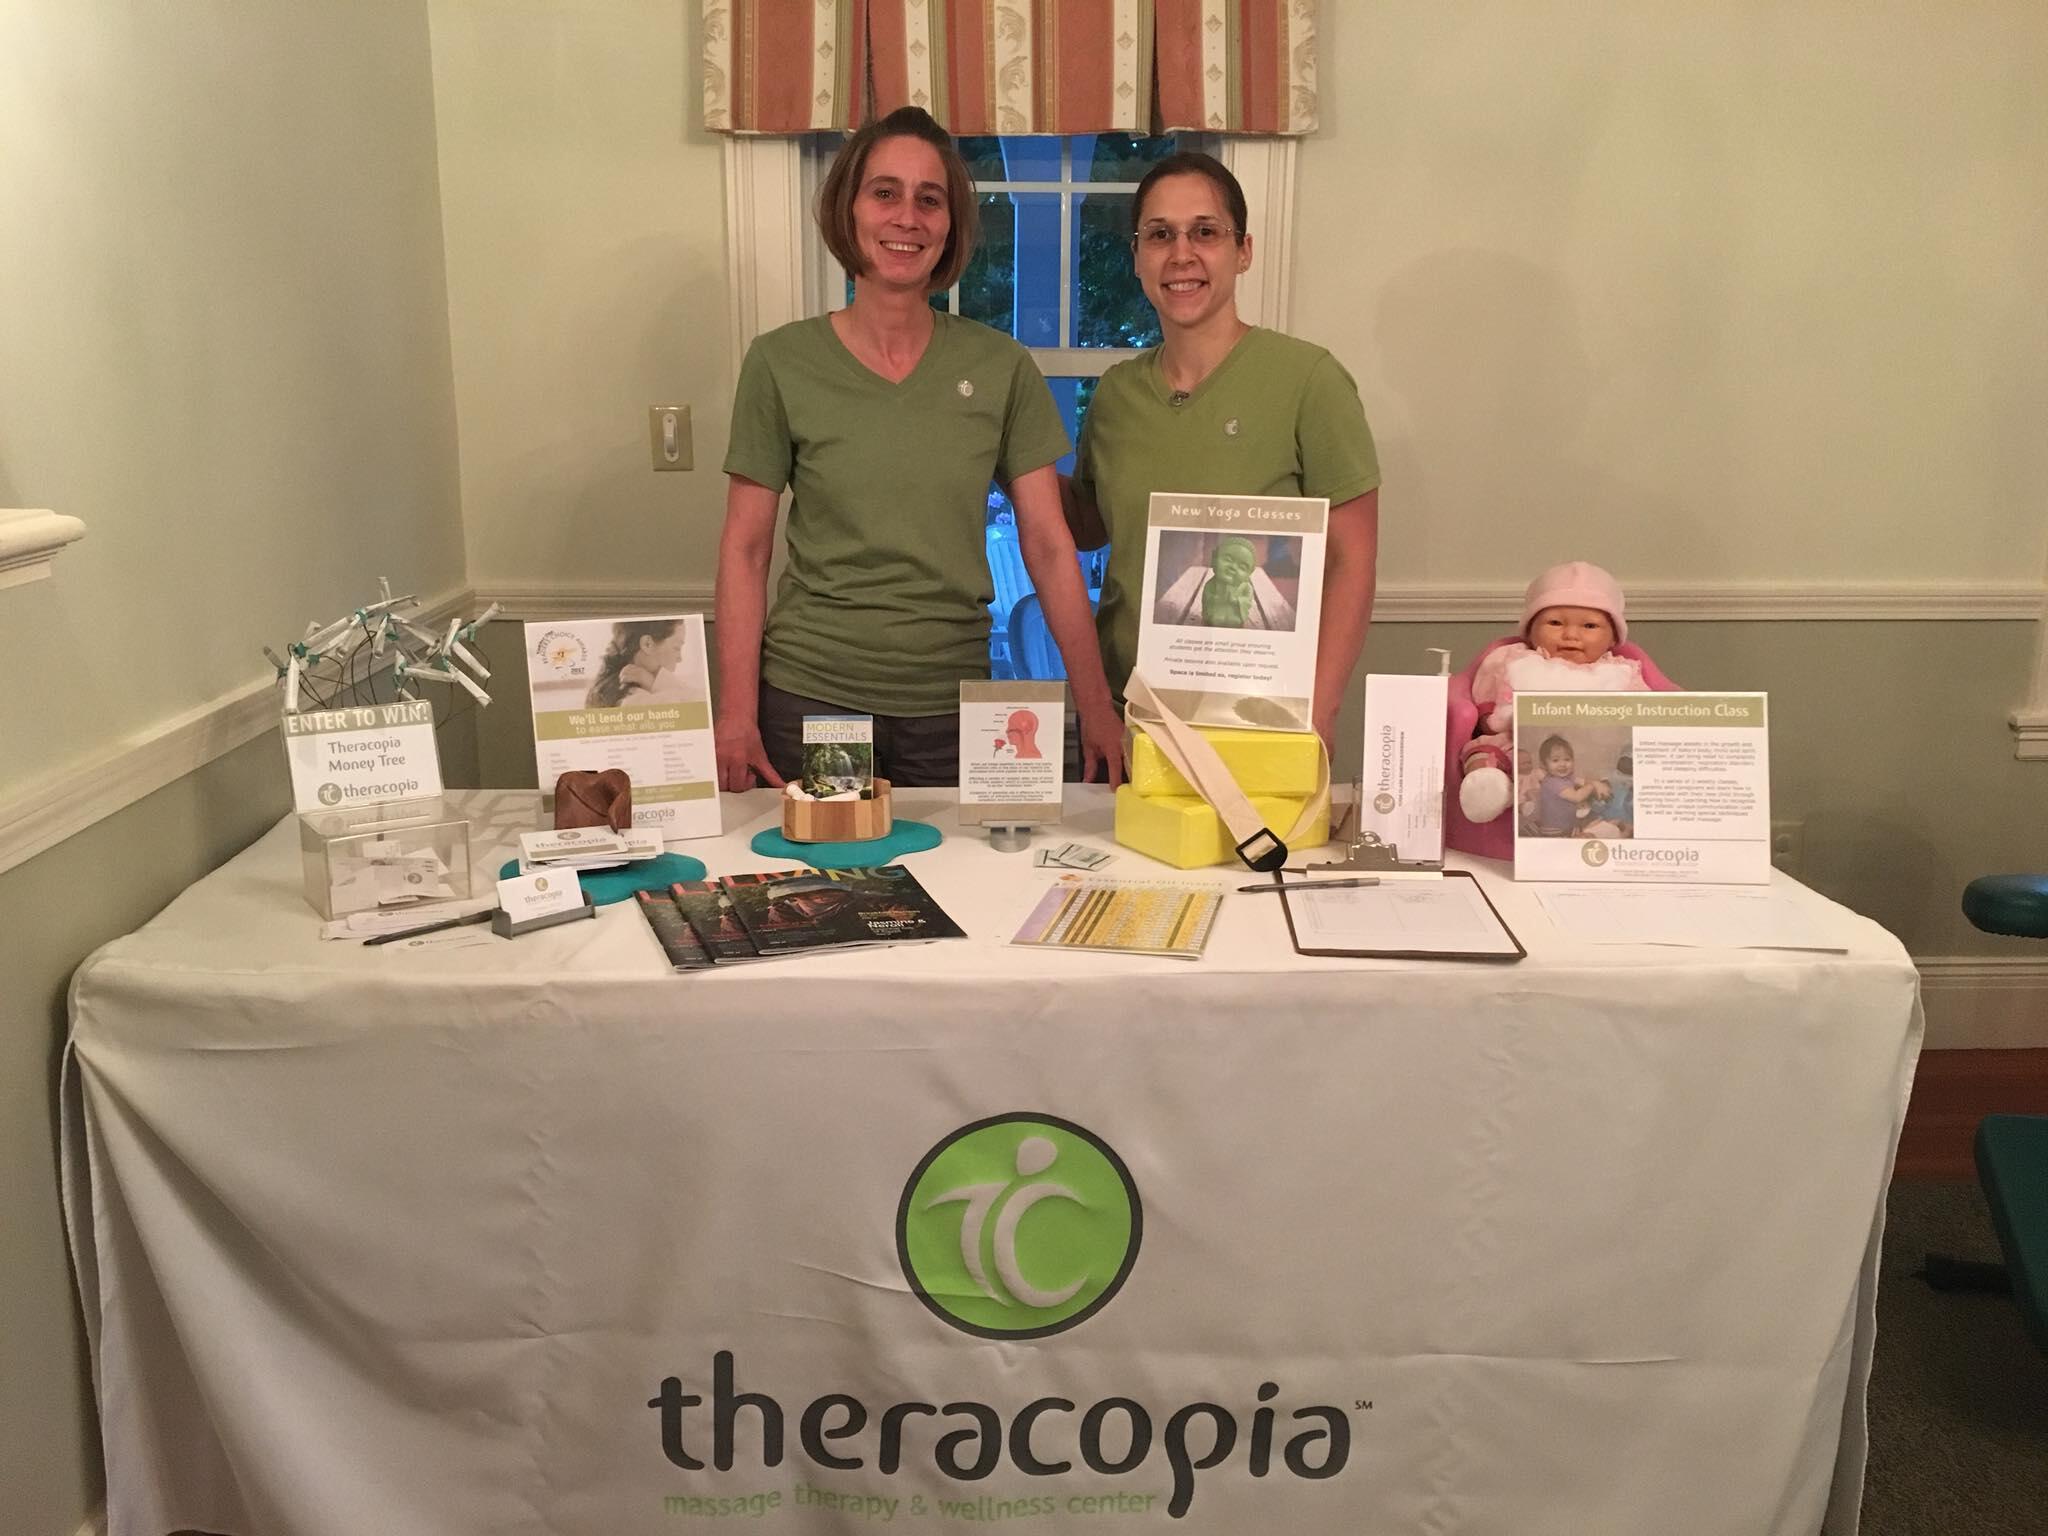 Theracopia Therapeutic Wellness Center 5 Crystal Pond Rd, Southborough Massachusetts 01772